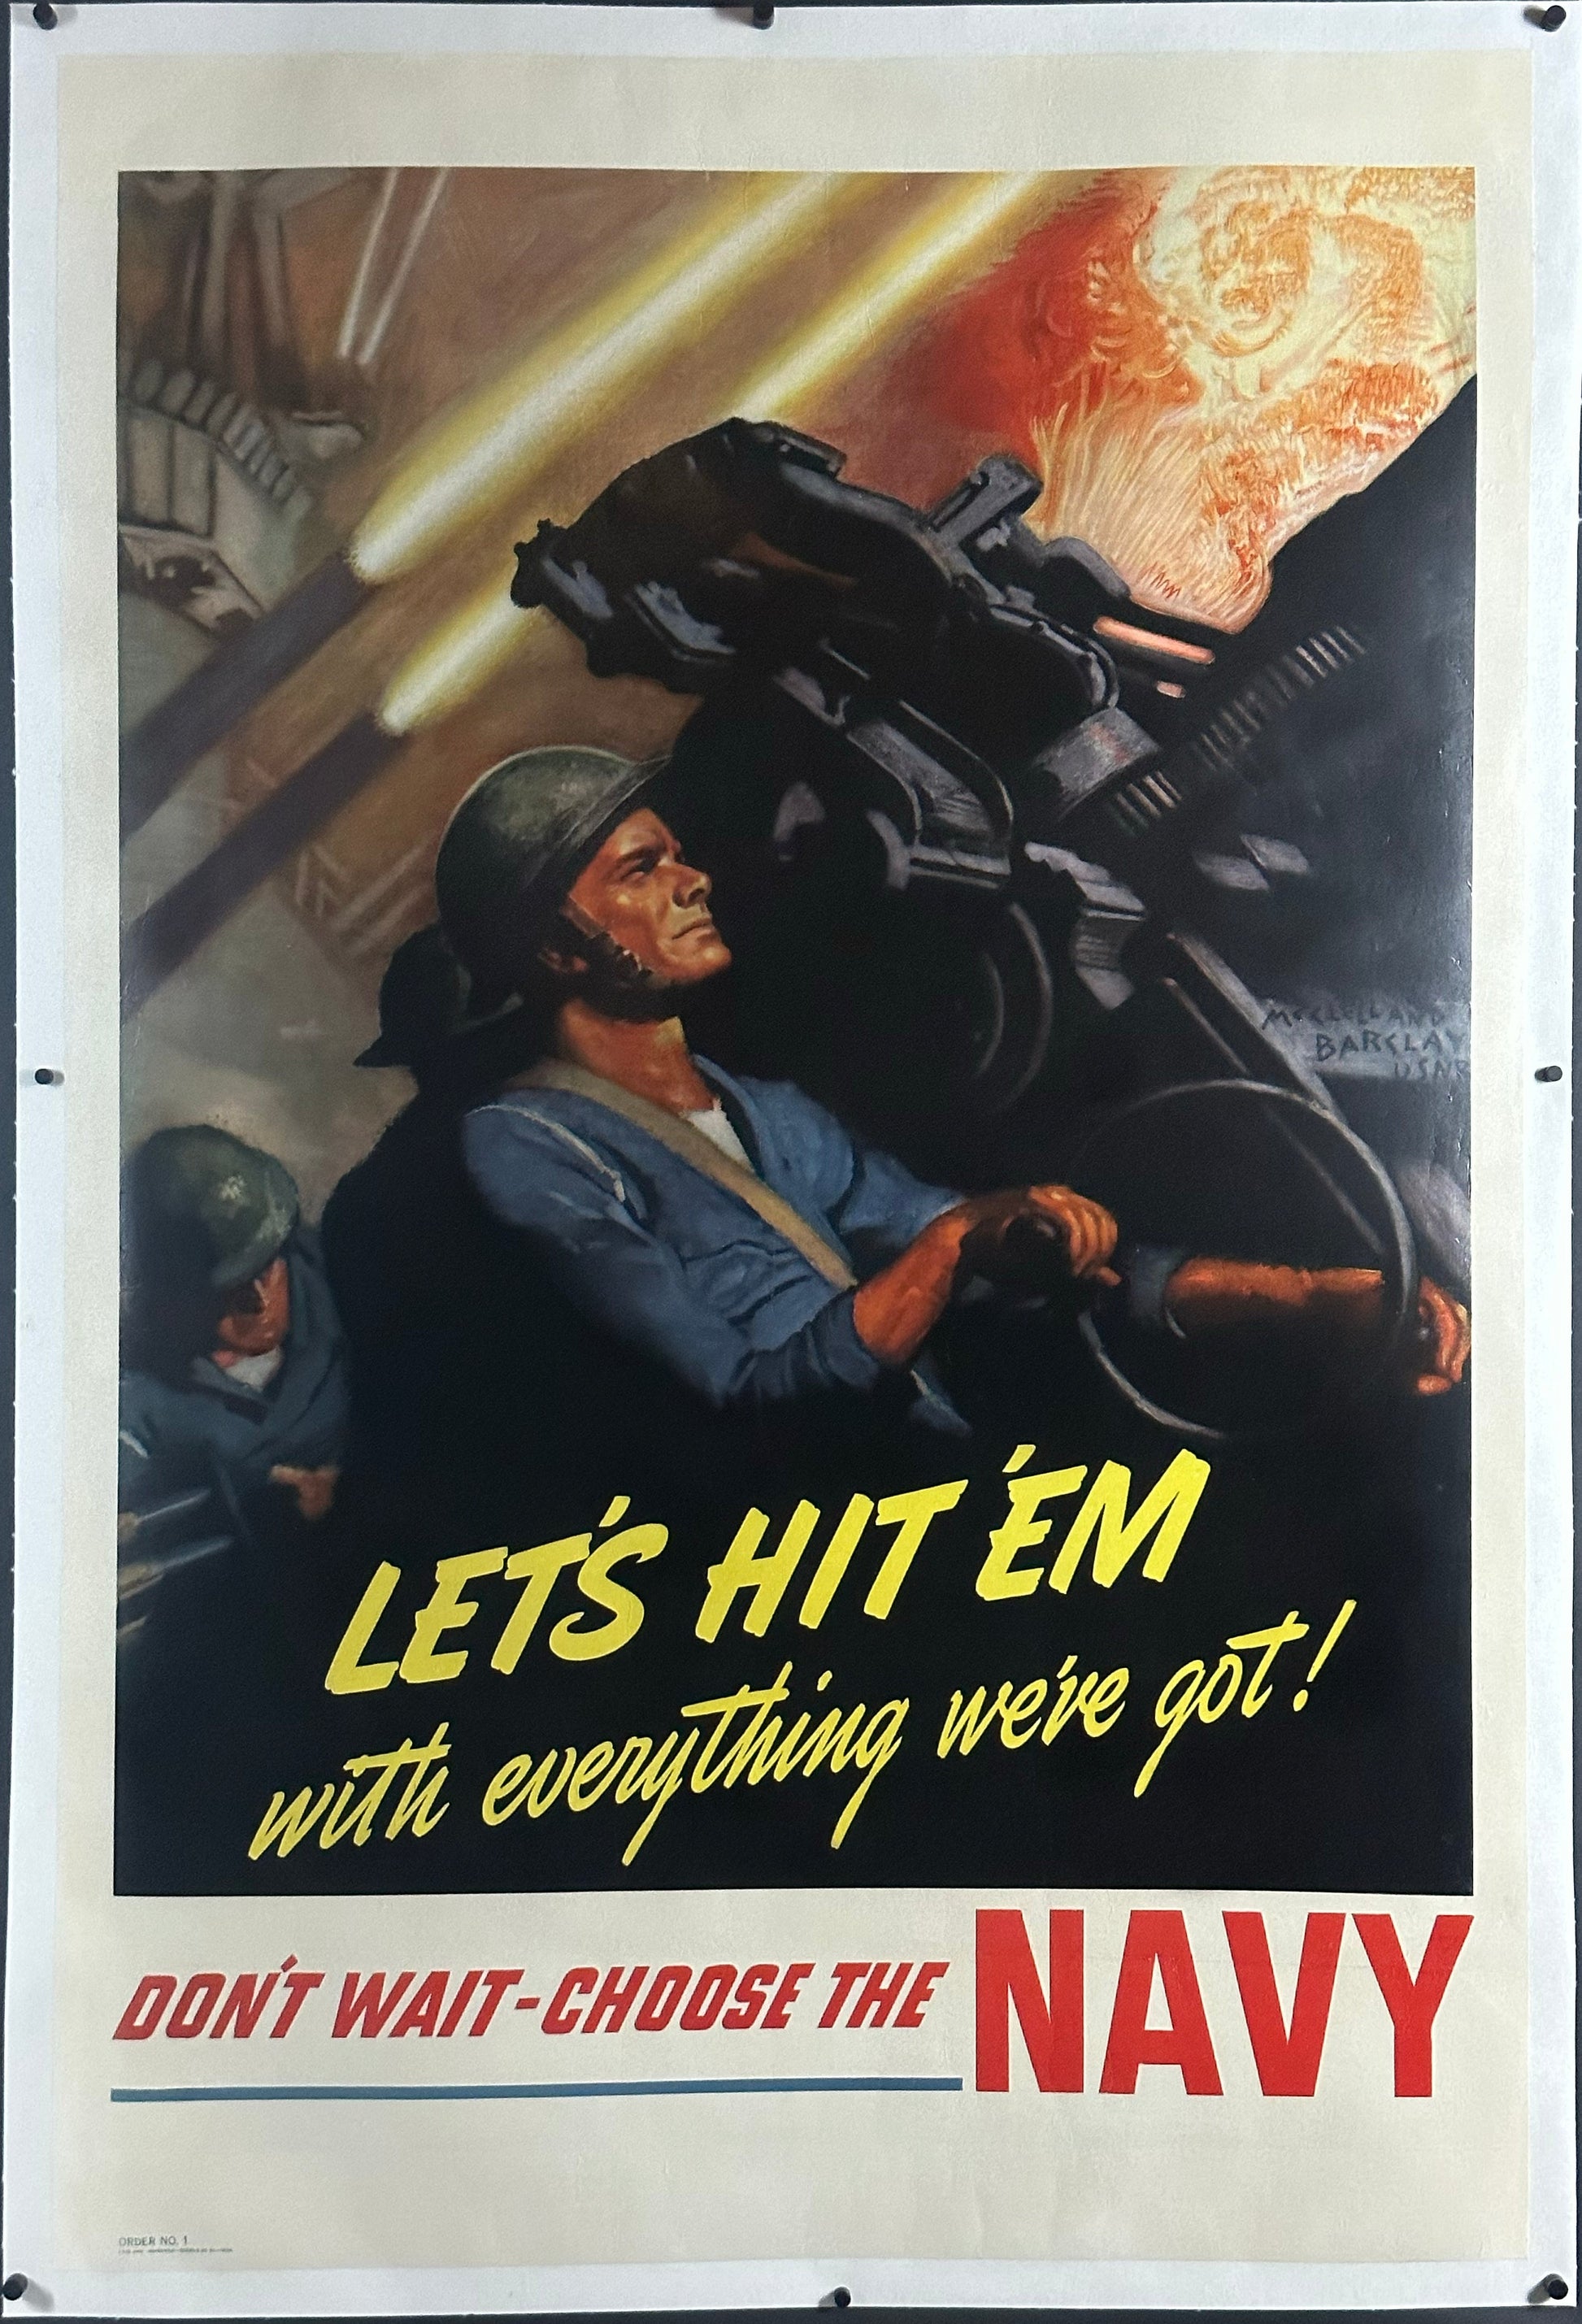 "Let's Hit 'Em With Everything We've Got!" WWII Navy Recruitment Poster by McClelland Barclay (1942) - posterpalace.com